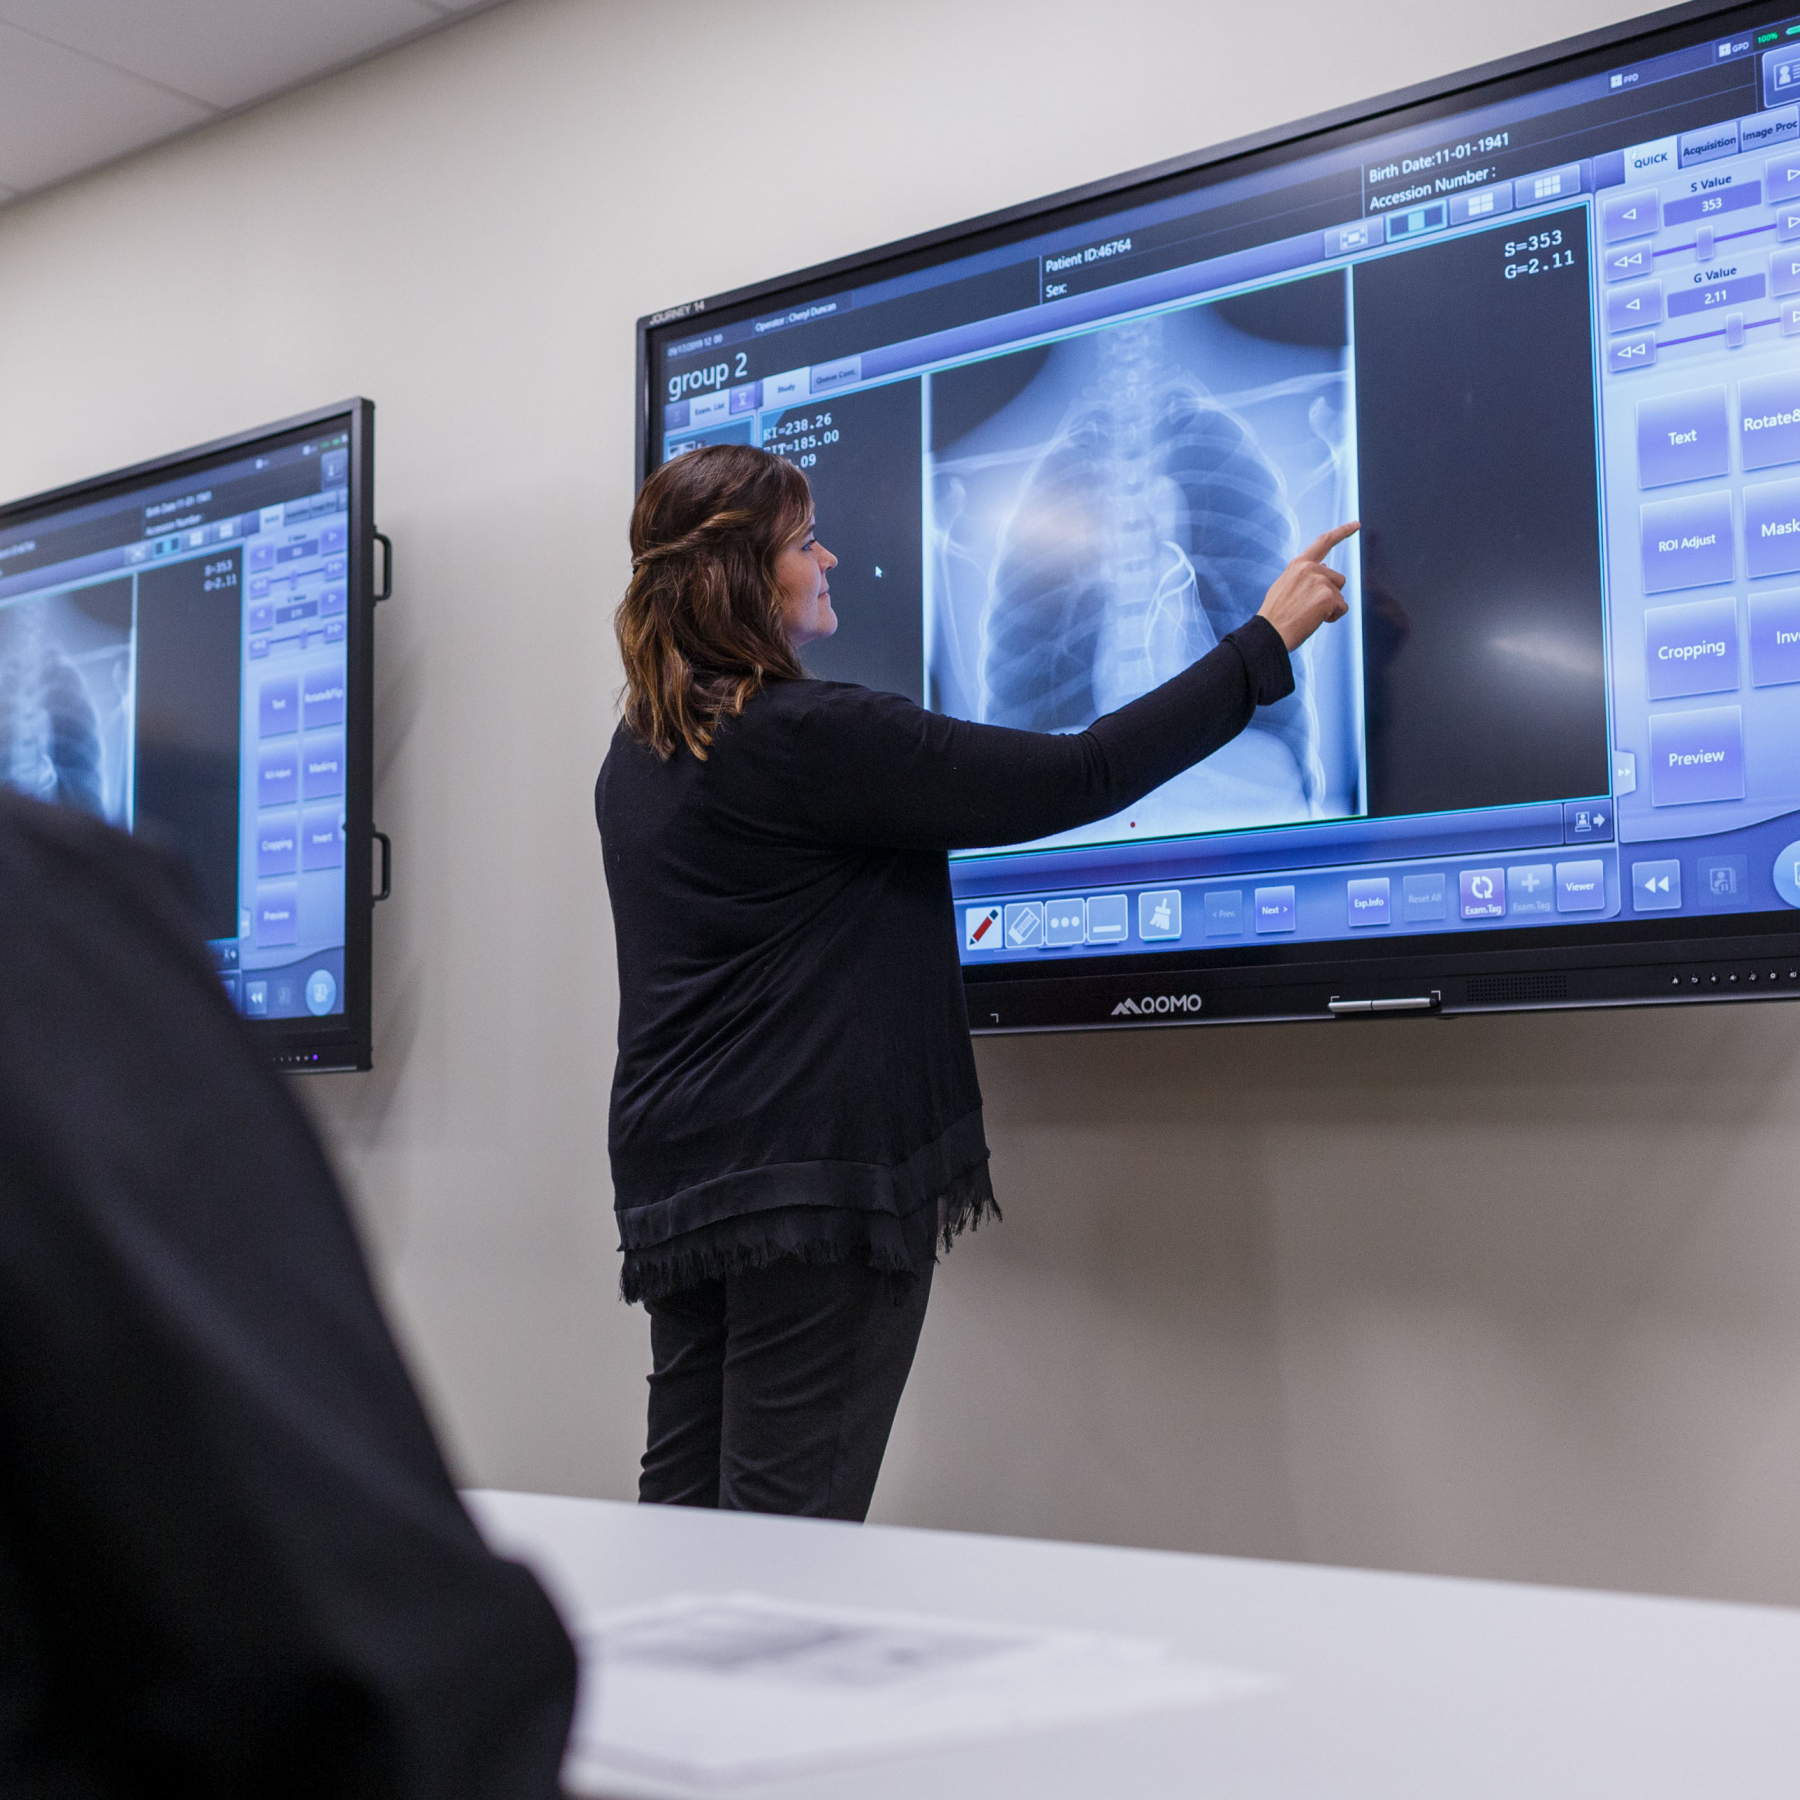 Instructor pointing to x-ray image on monitor.